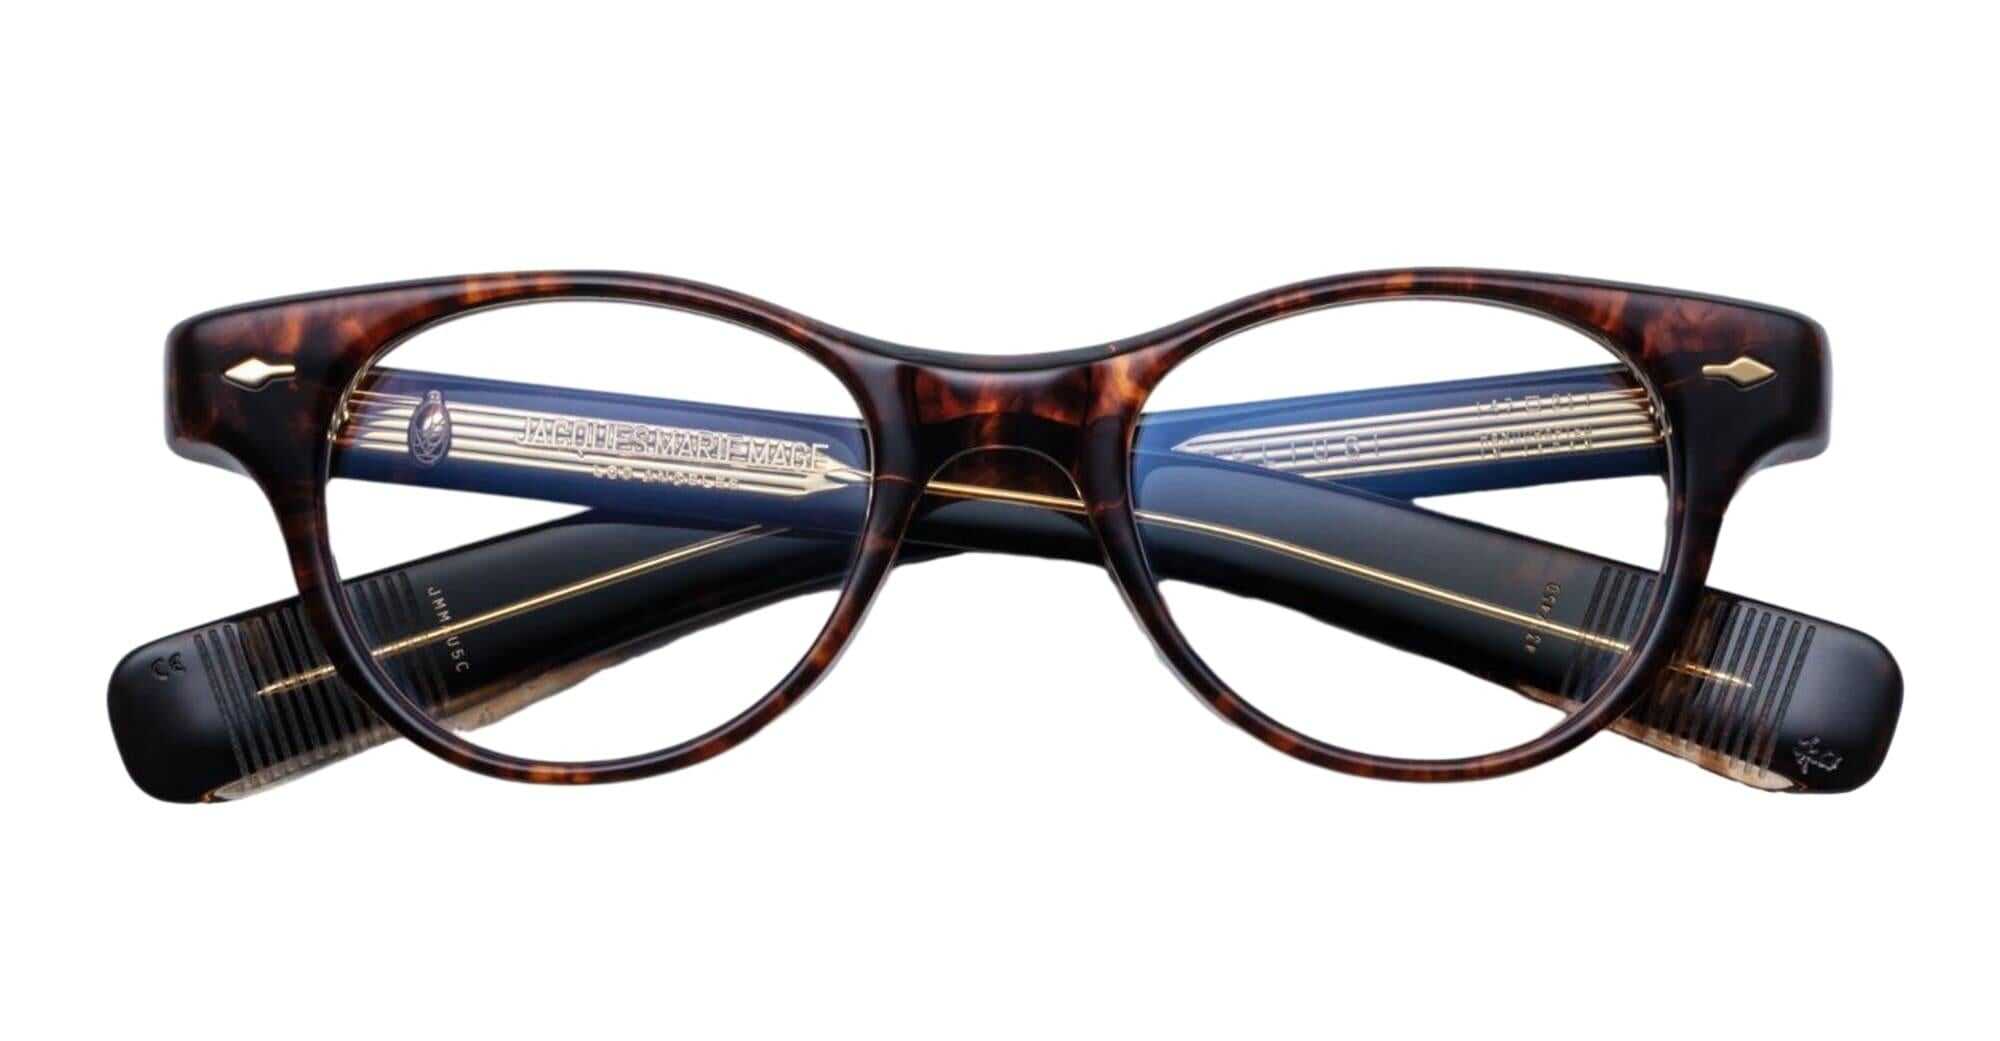 JACQUES MARIE MAGE Jacques Marie Mage EYEGLASSES TORTOISE